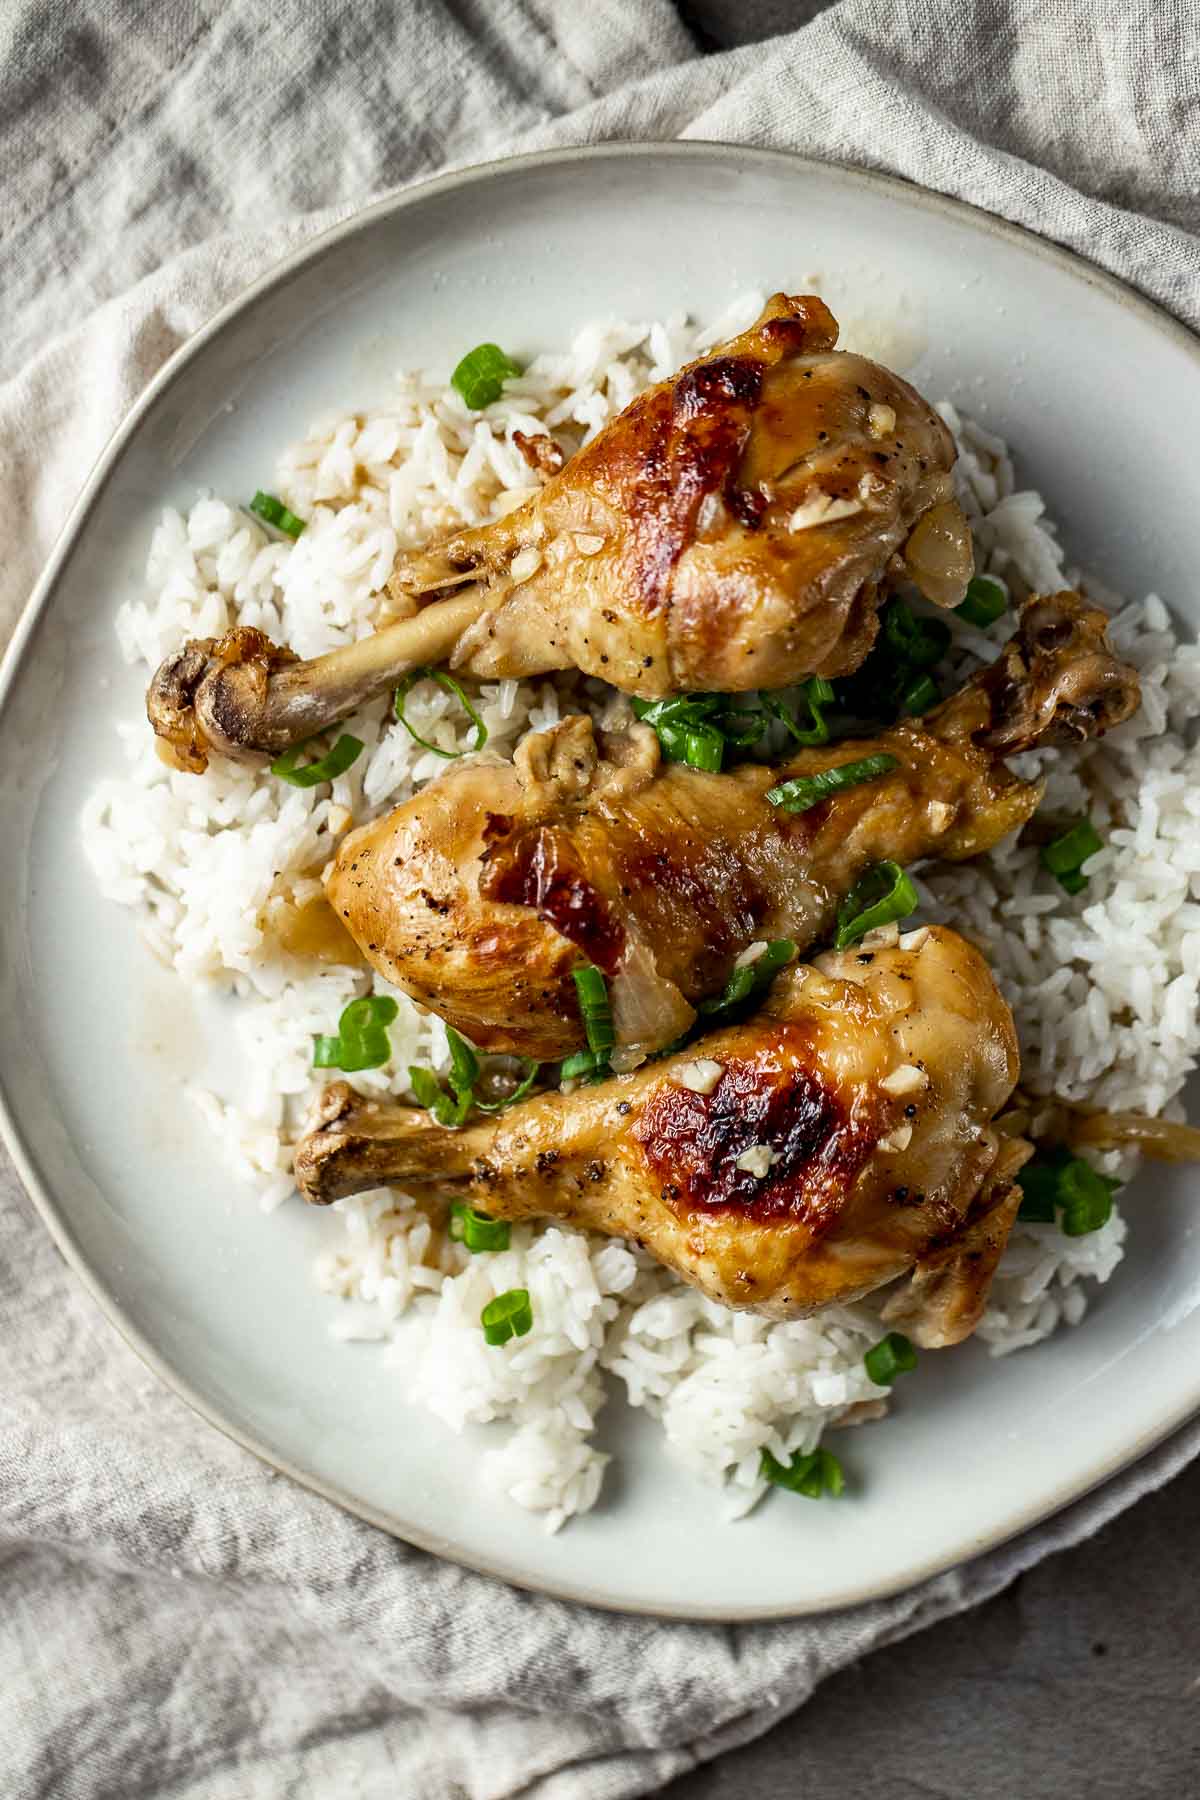 Instant Pot chicken adobo served on a bed of rice and garnished with chopped green onion.